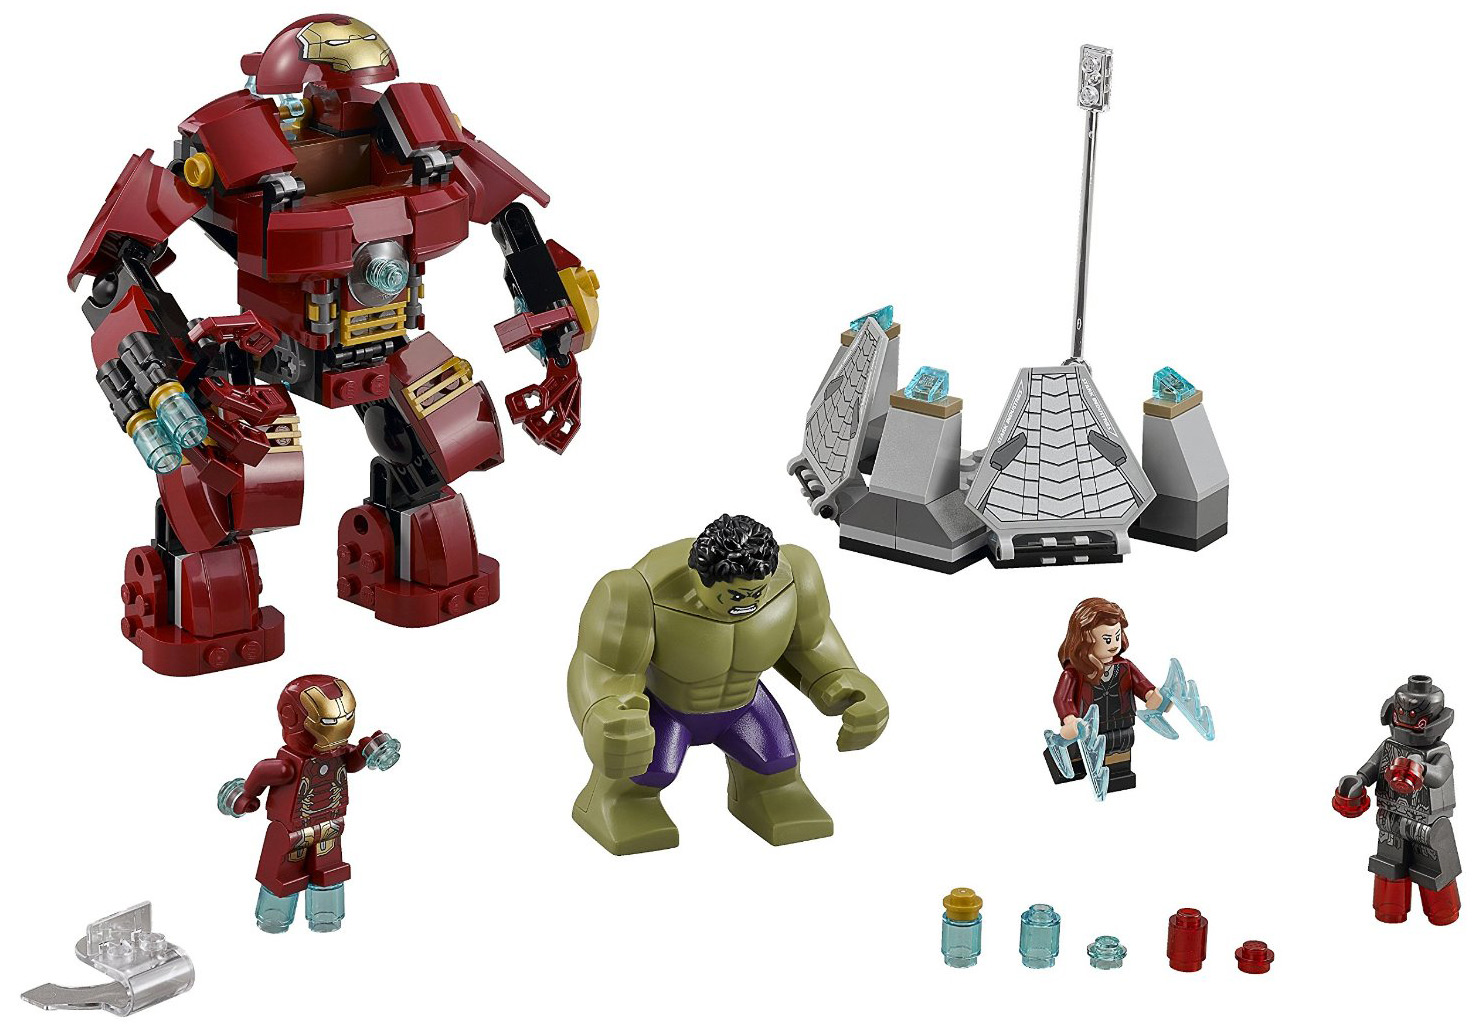  be headlining your LEGO Avengers Age of Ultron collection this winter